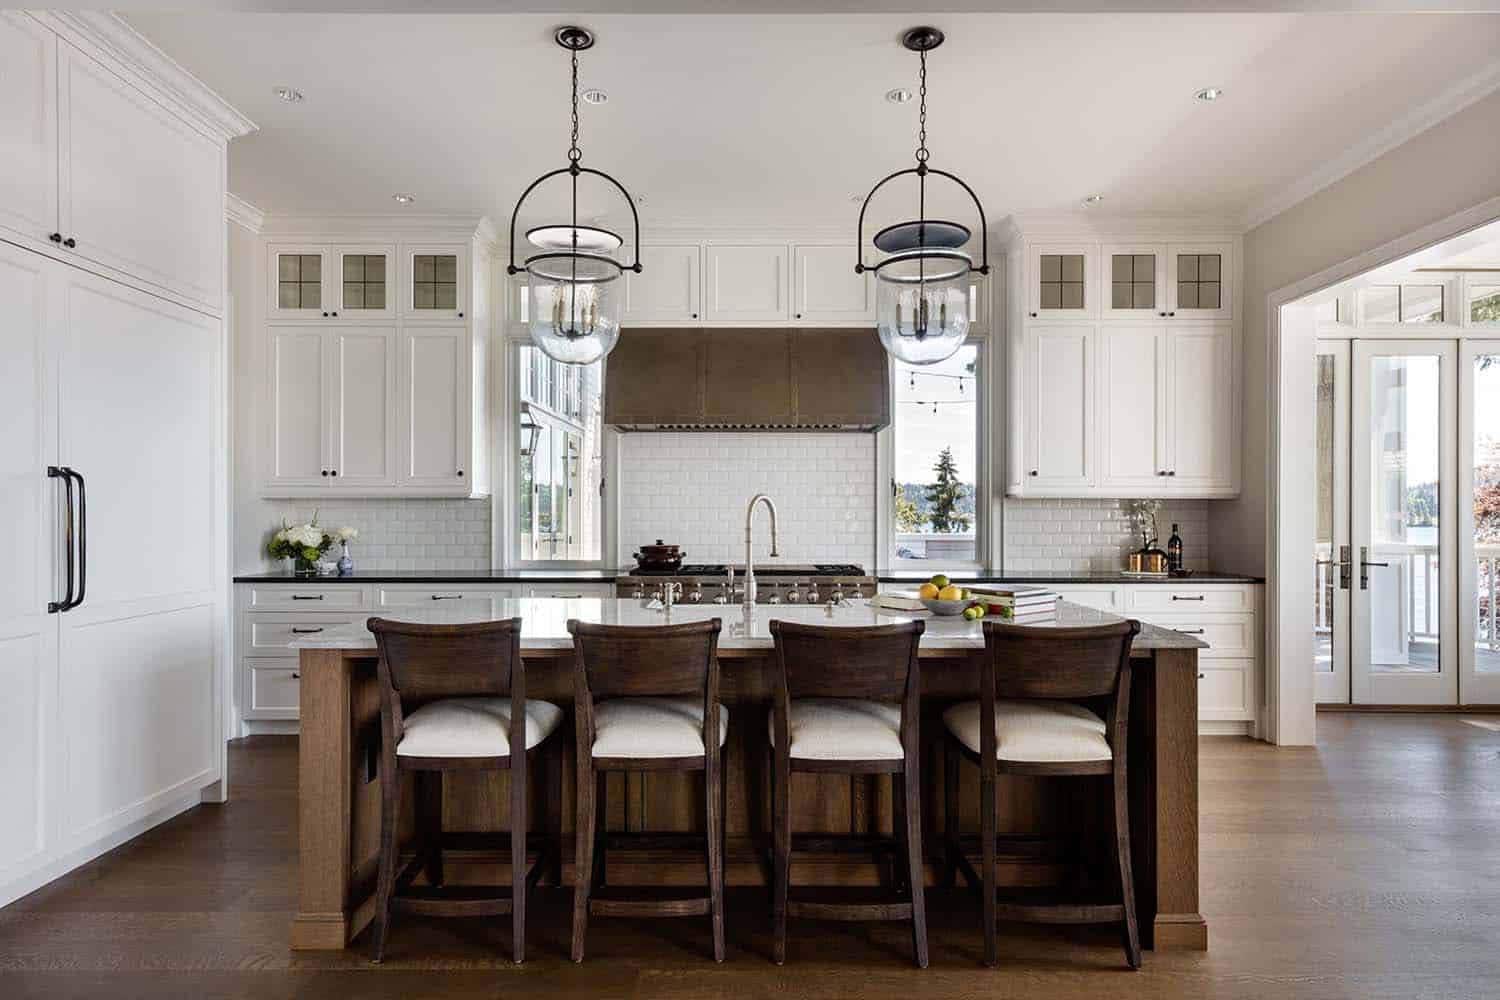 contemporary kitchen with large pendant lights over the island